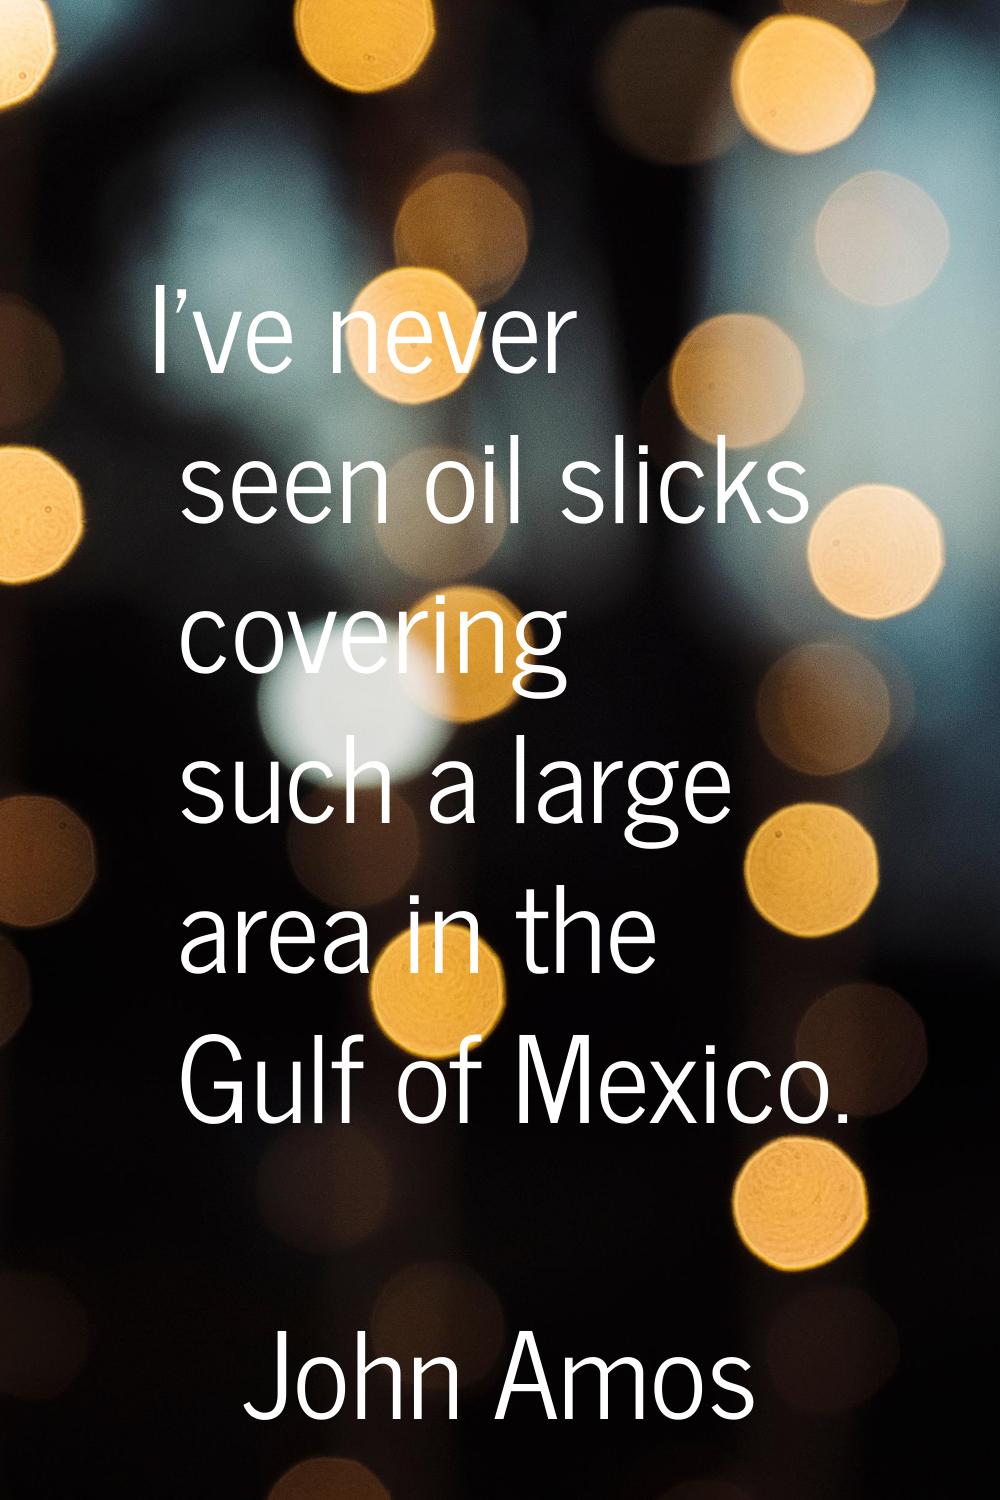 I've never seen oil slicks covering such a large area in the Gulf of Mexico.